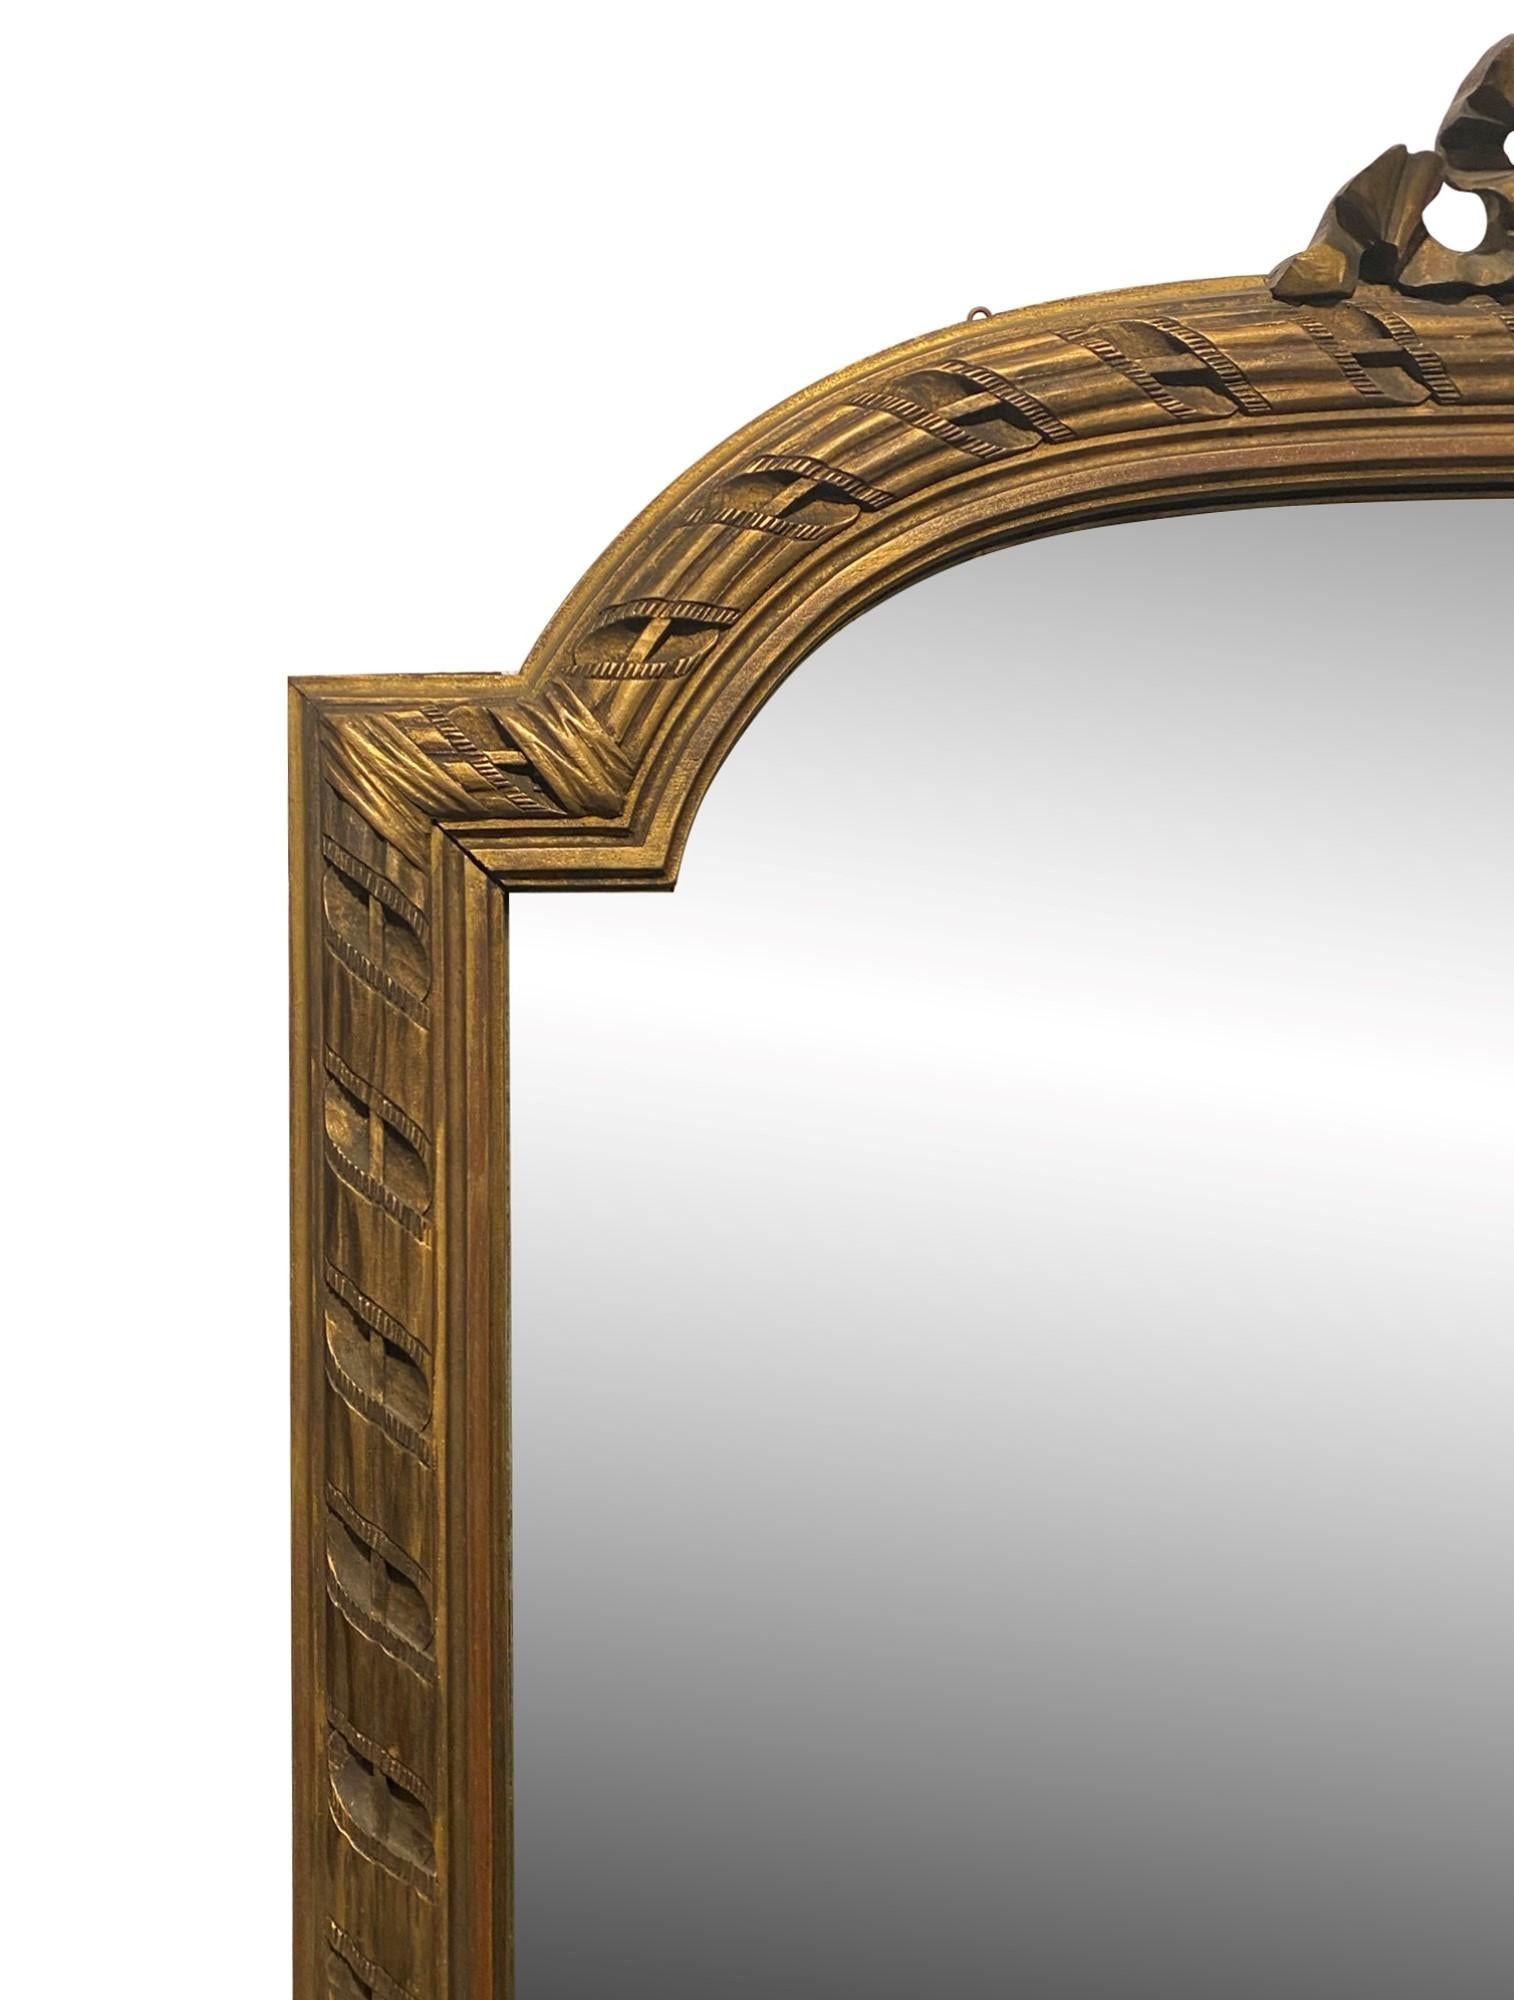 Early 20th century hand carved wood French gilded over mantel mirror done in the Louis XVI style with decorative details surrounding the frame and a ribbon motif in the top center. This can be seen at our 333 West 52nd St location in the Theater